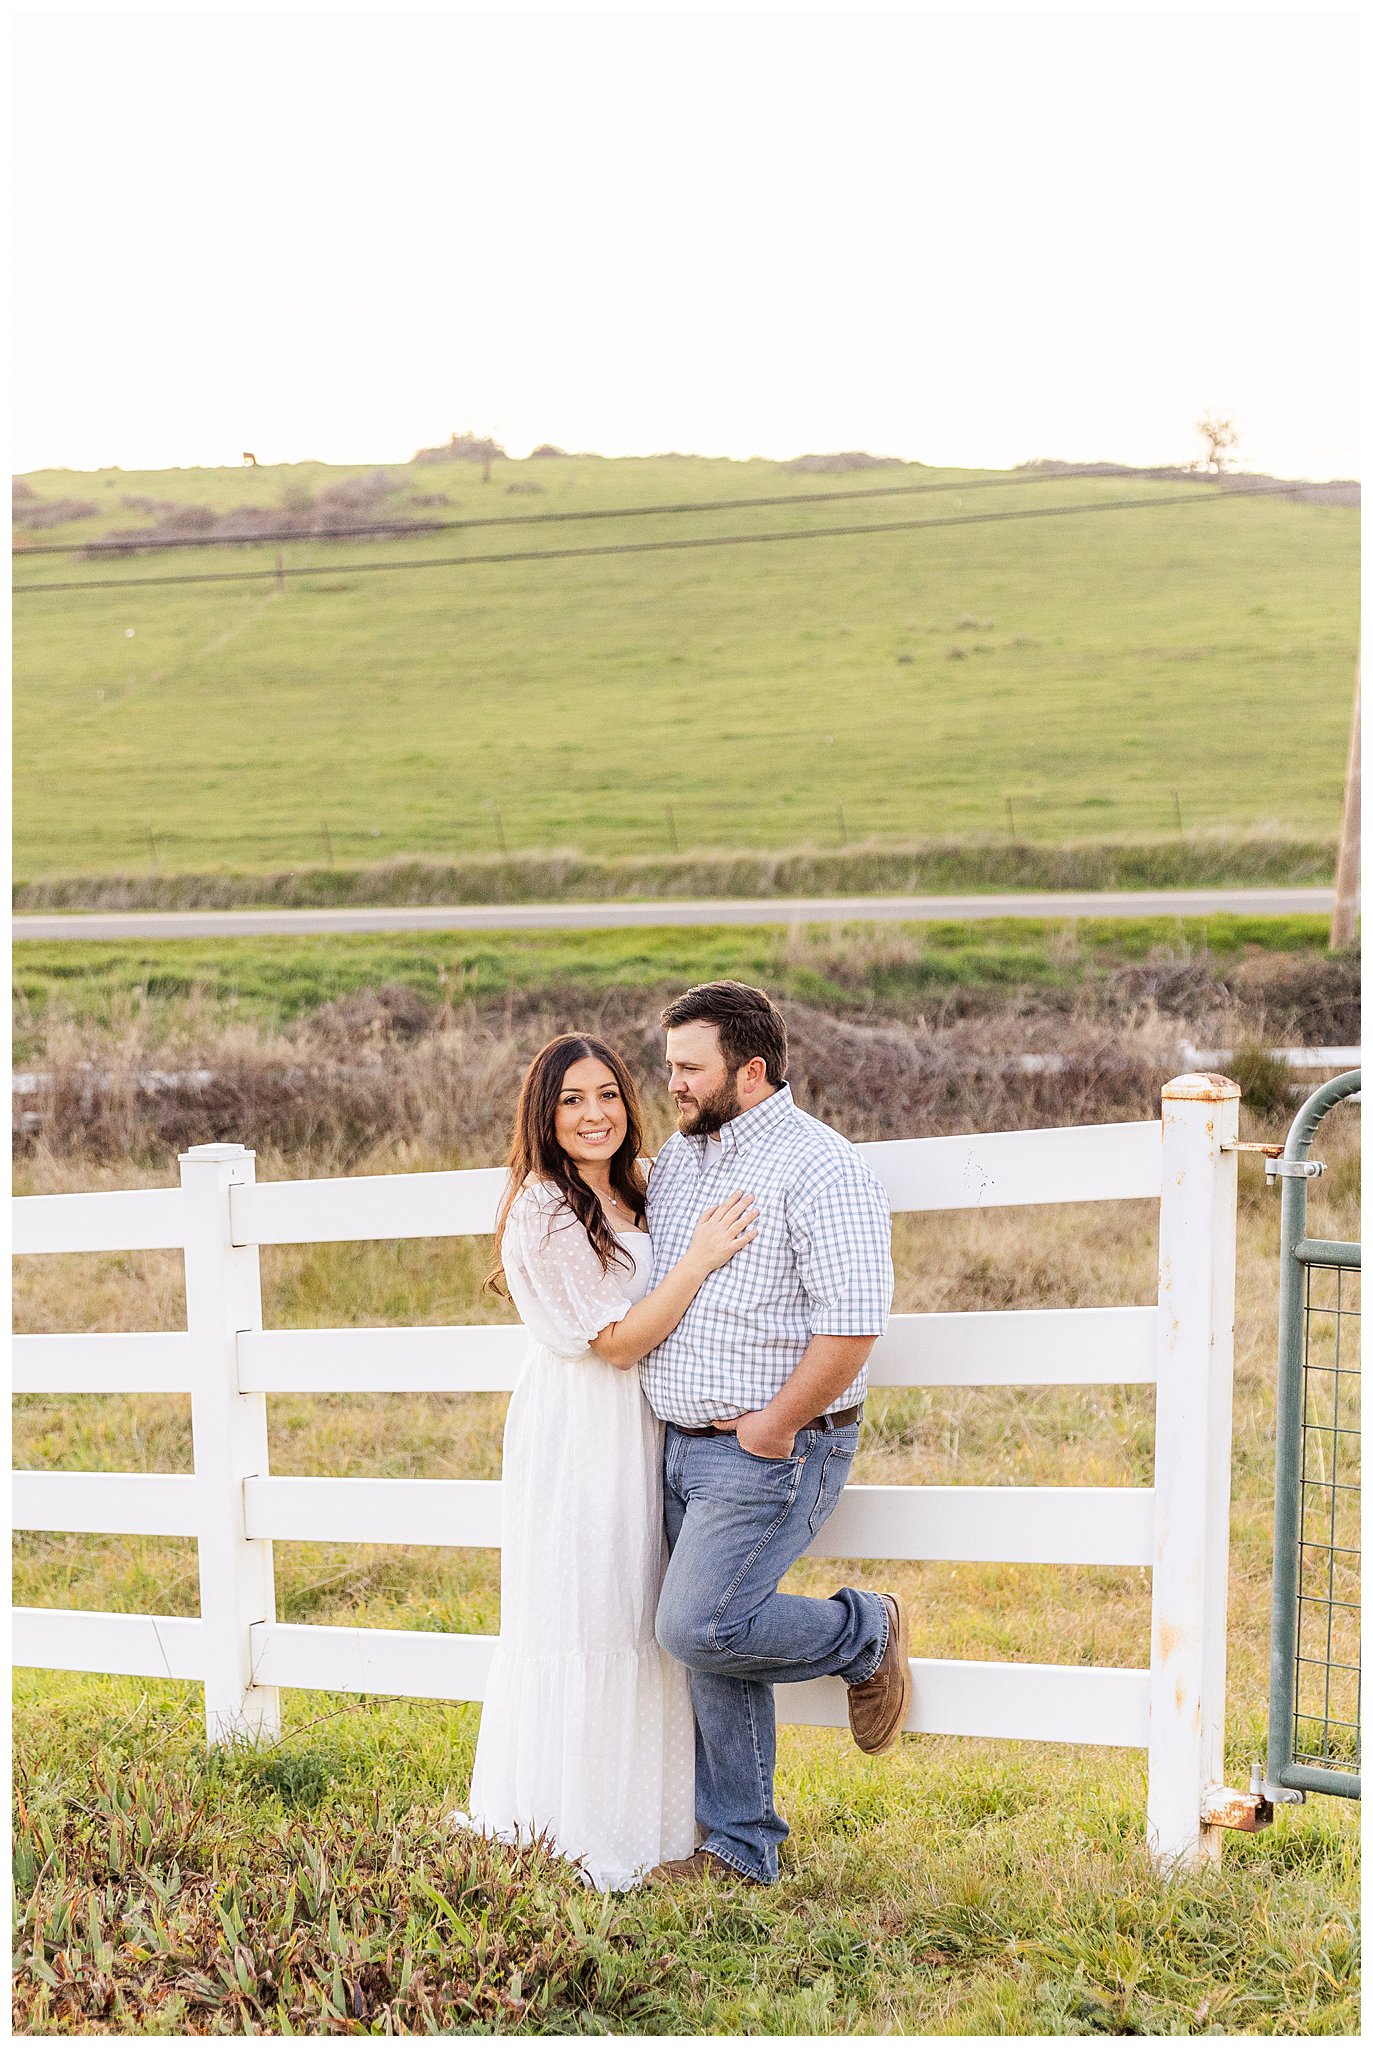 Country Engagement Session in the Hills of Lincoln, CA | Alanna + Joseph